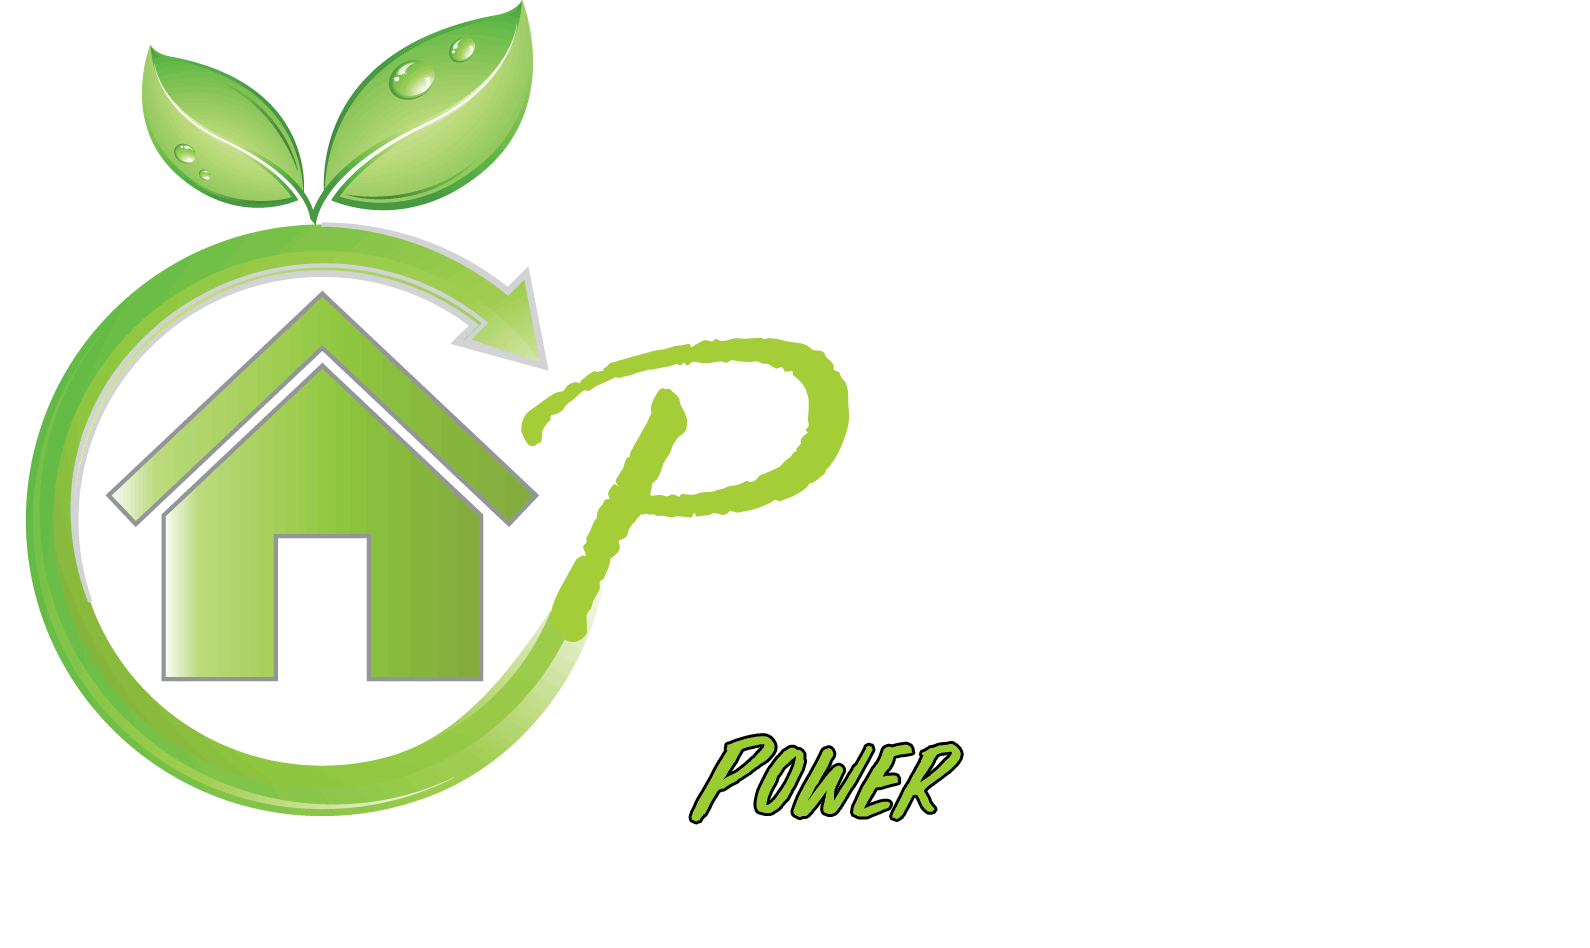 Perkins Energy Conservation